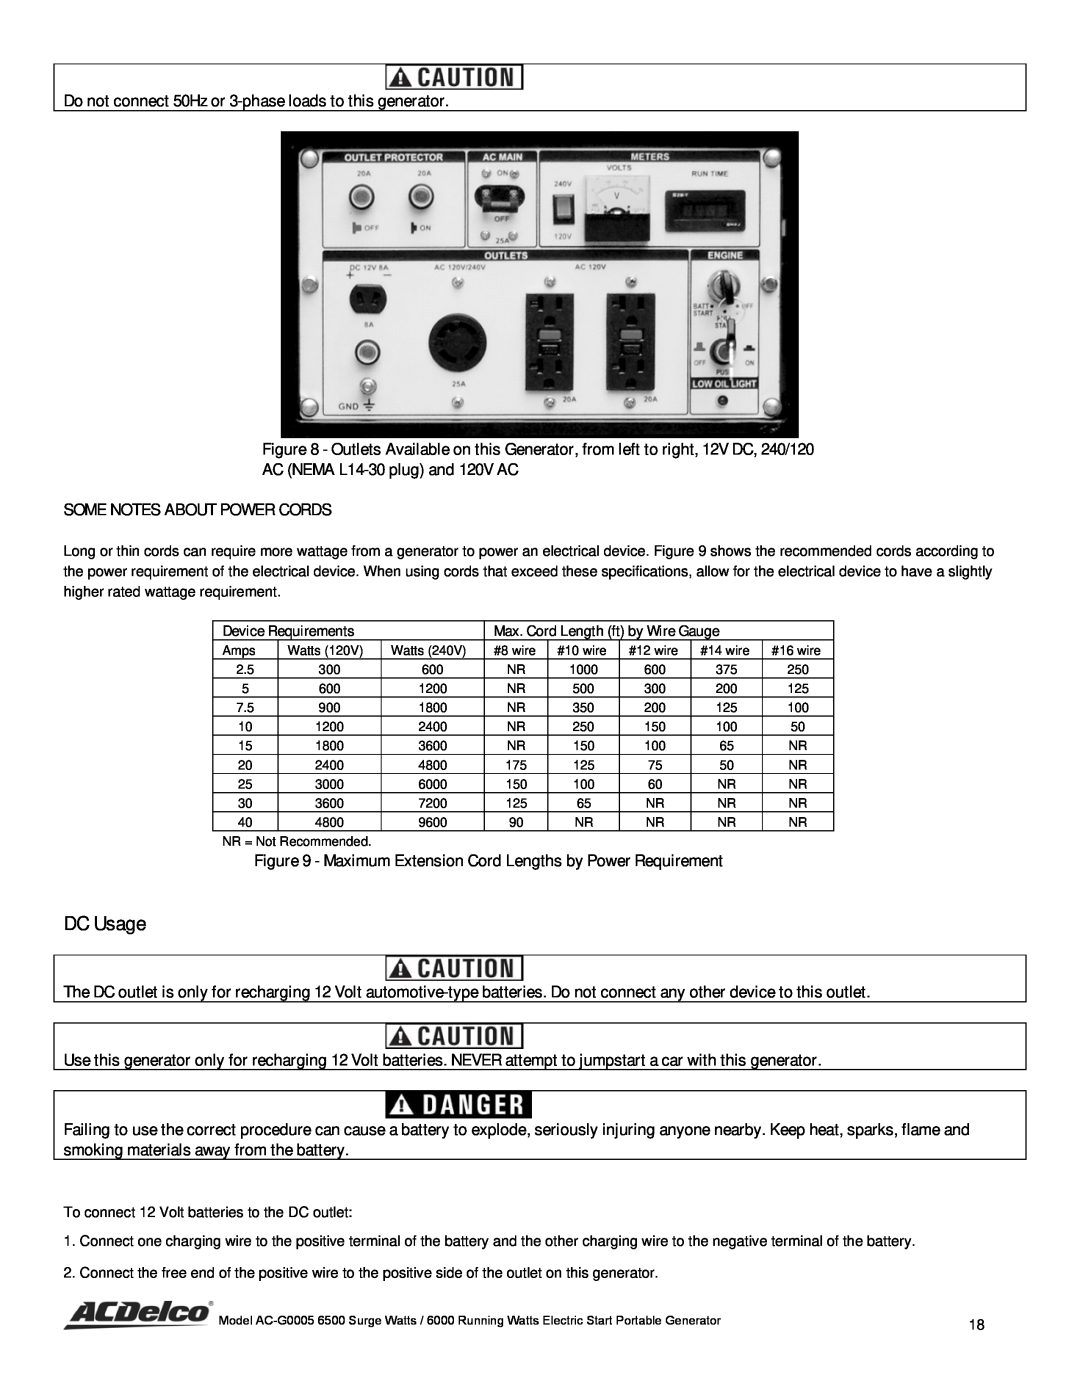 ACDelco AC-G0005 instruction manual DC Usage, Do not connect 50Hz or 3-phase loads to this generator 